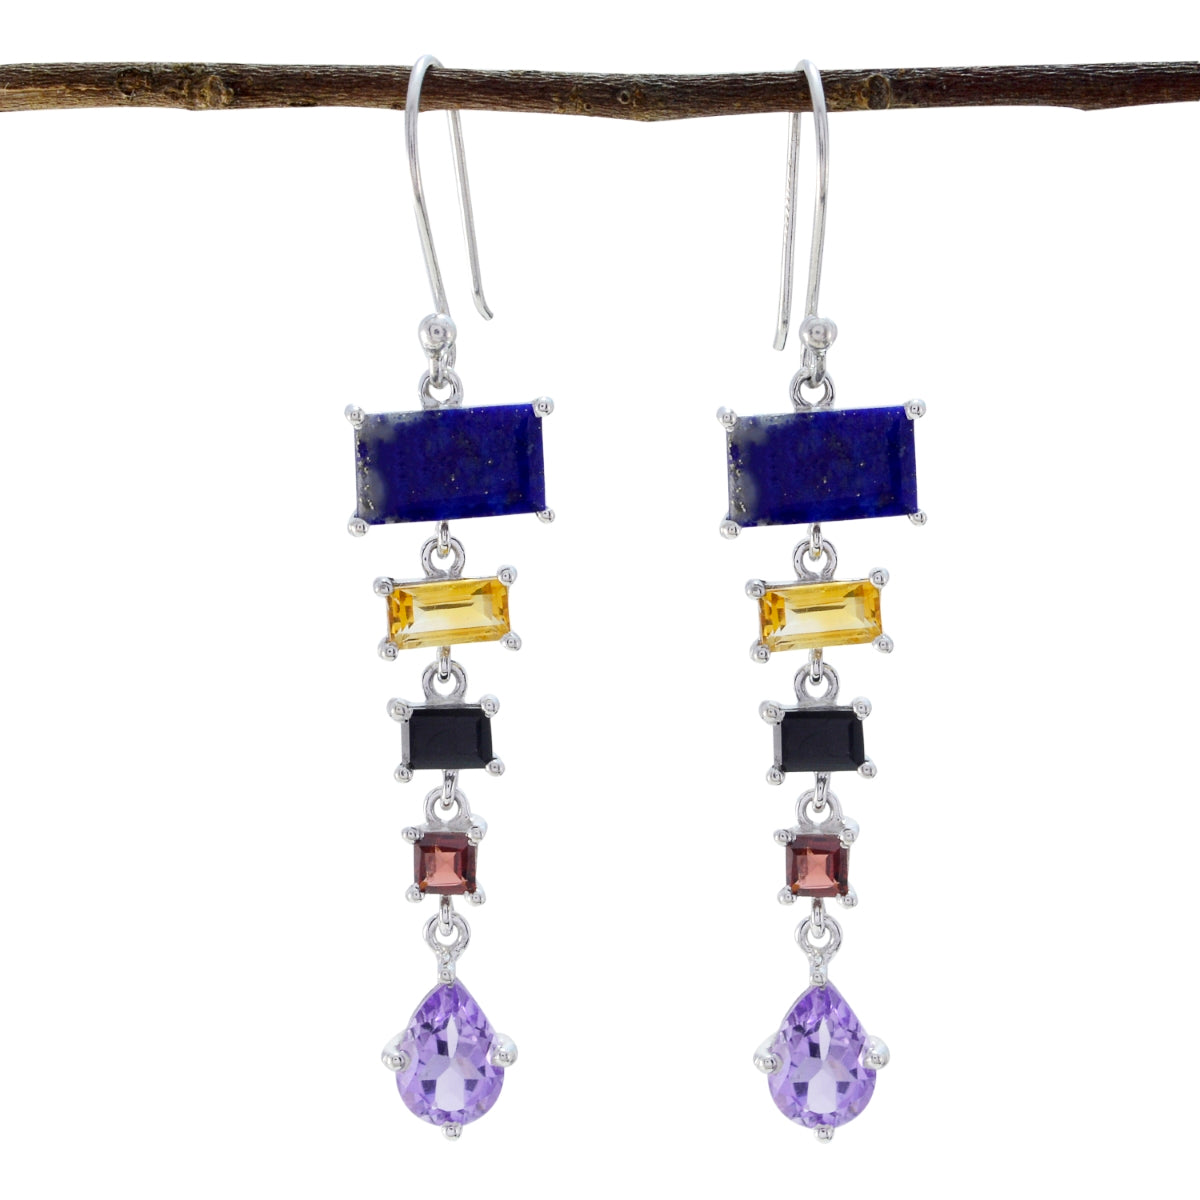 Riyo Good Gemstones multi shape Faceted Multi Multi Stone Silver Earring gift for new years day